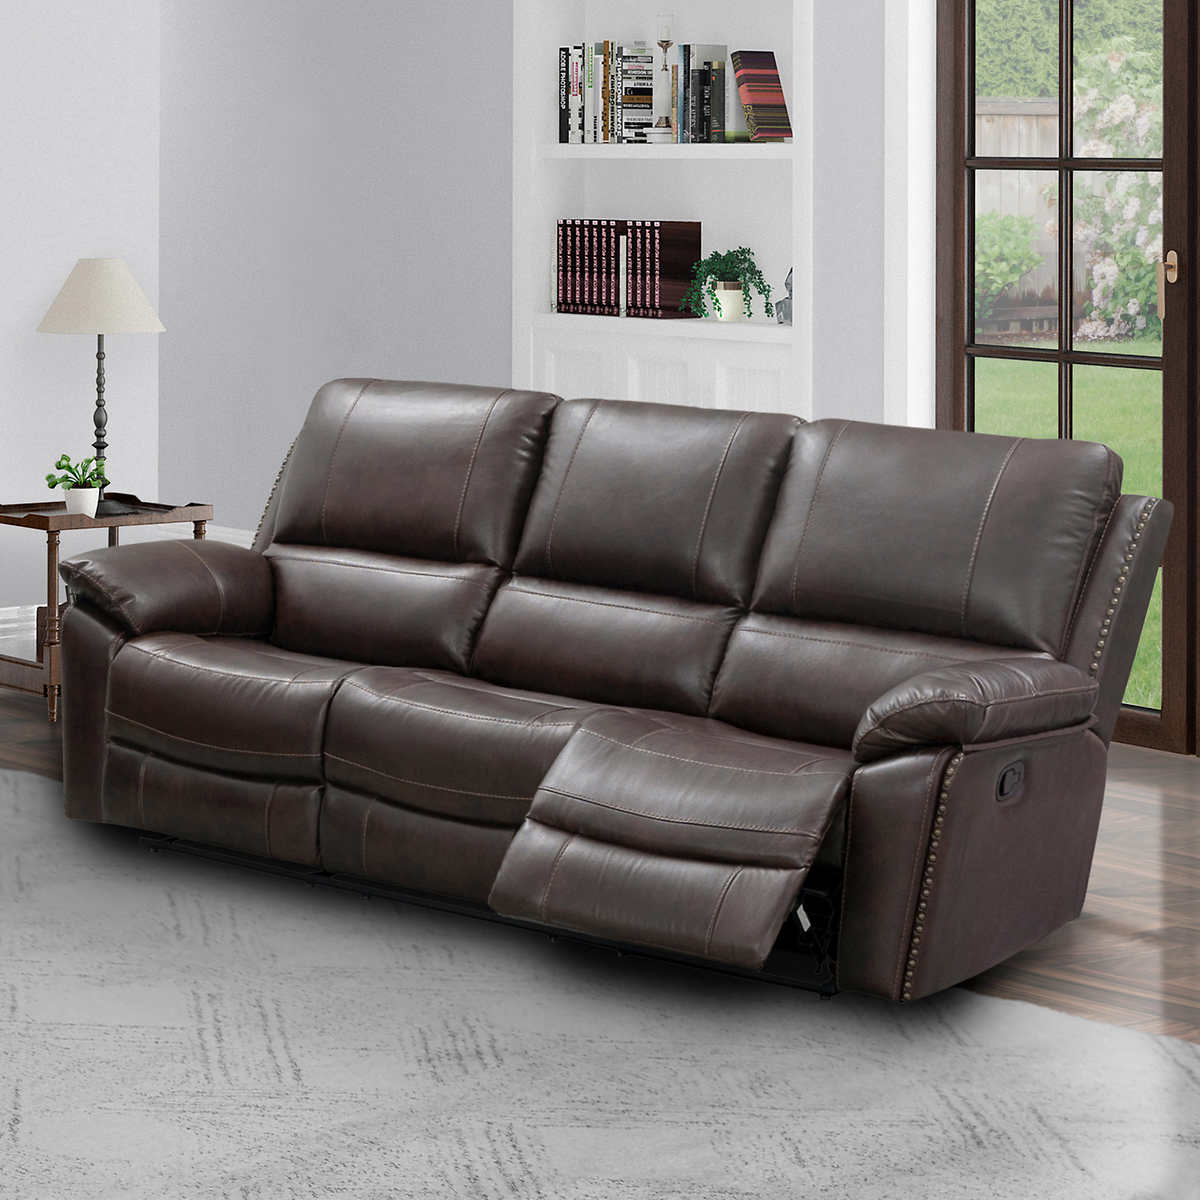 Soldano Leather Reclining Sofa Costco, Brown Leather Reclining Couch